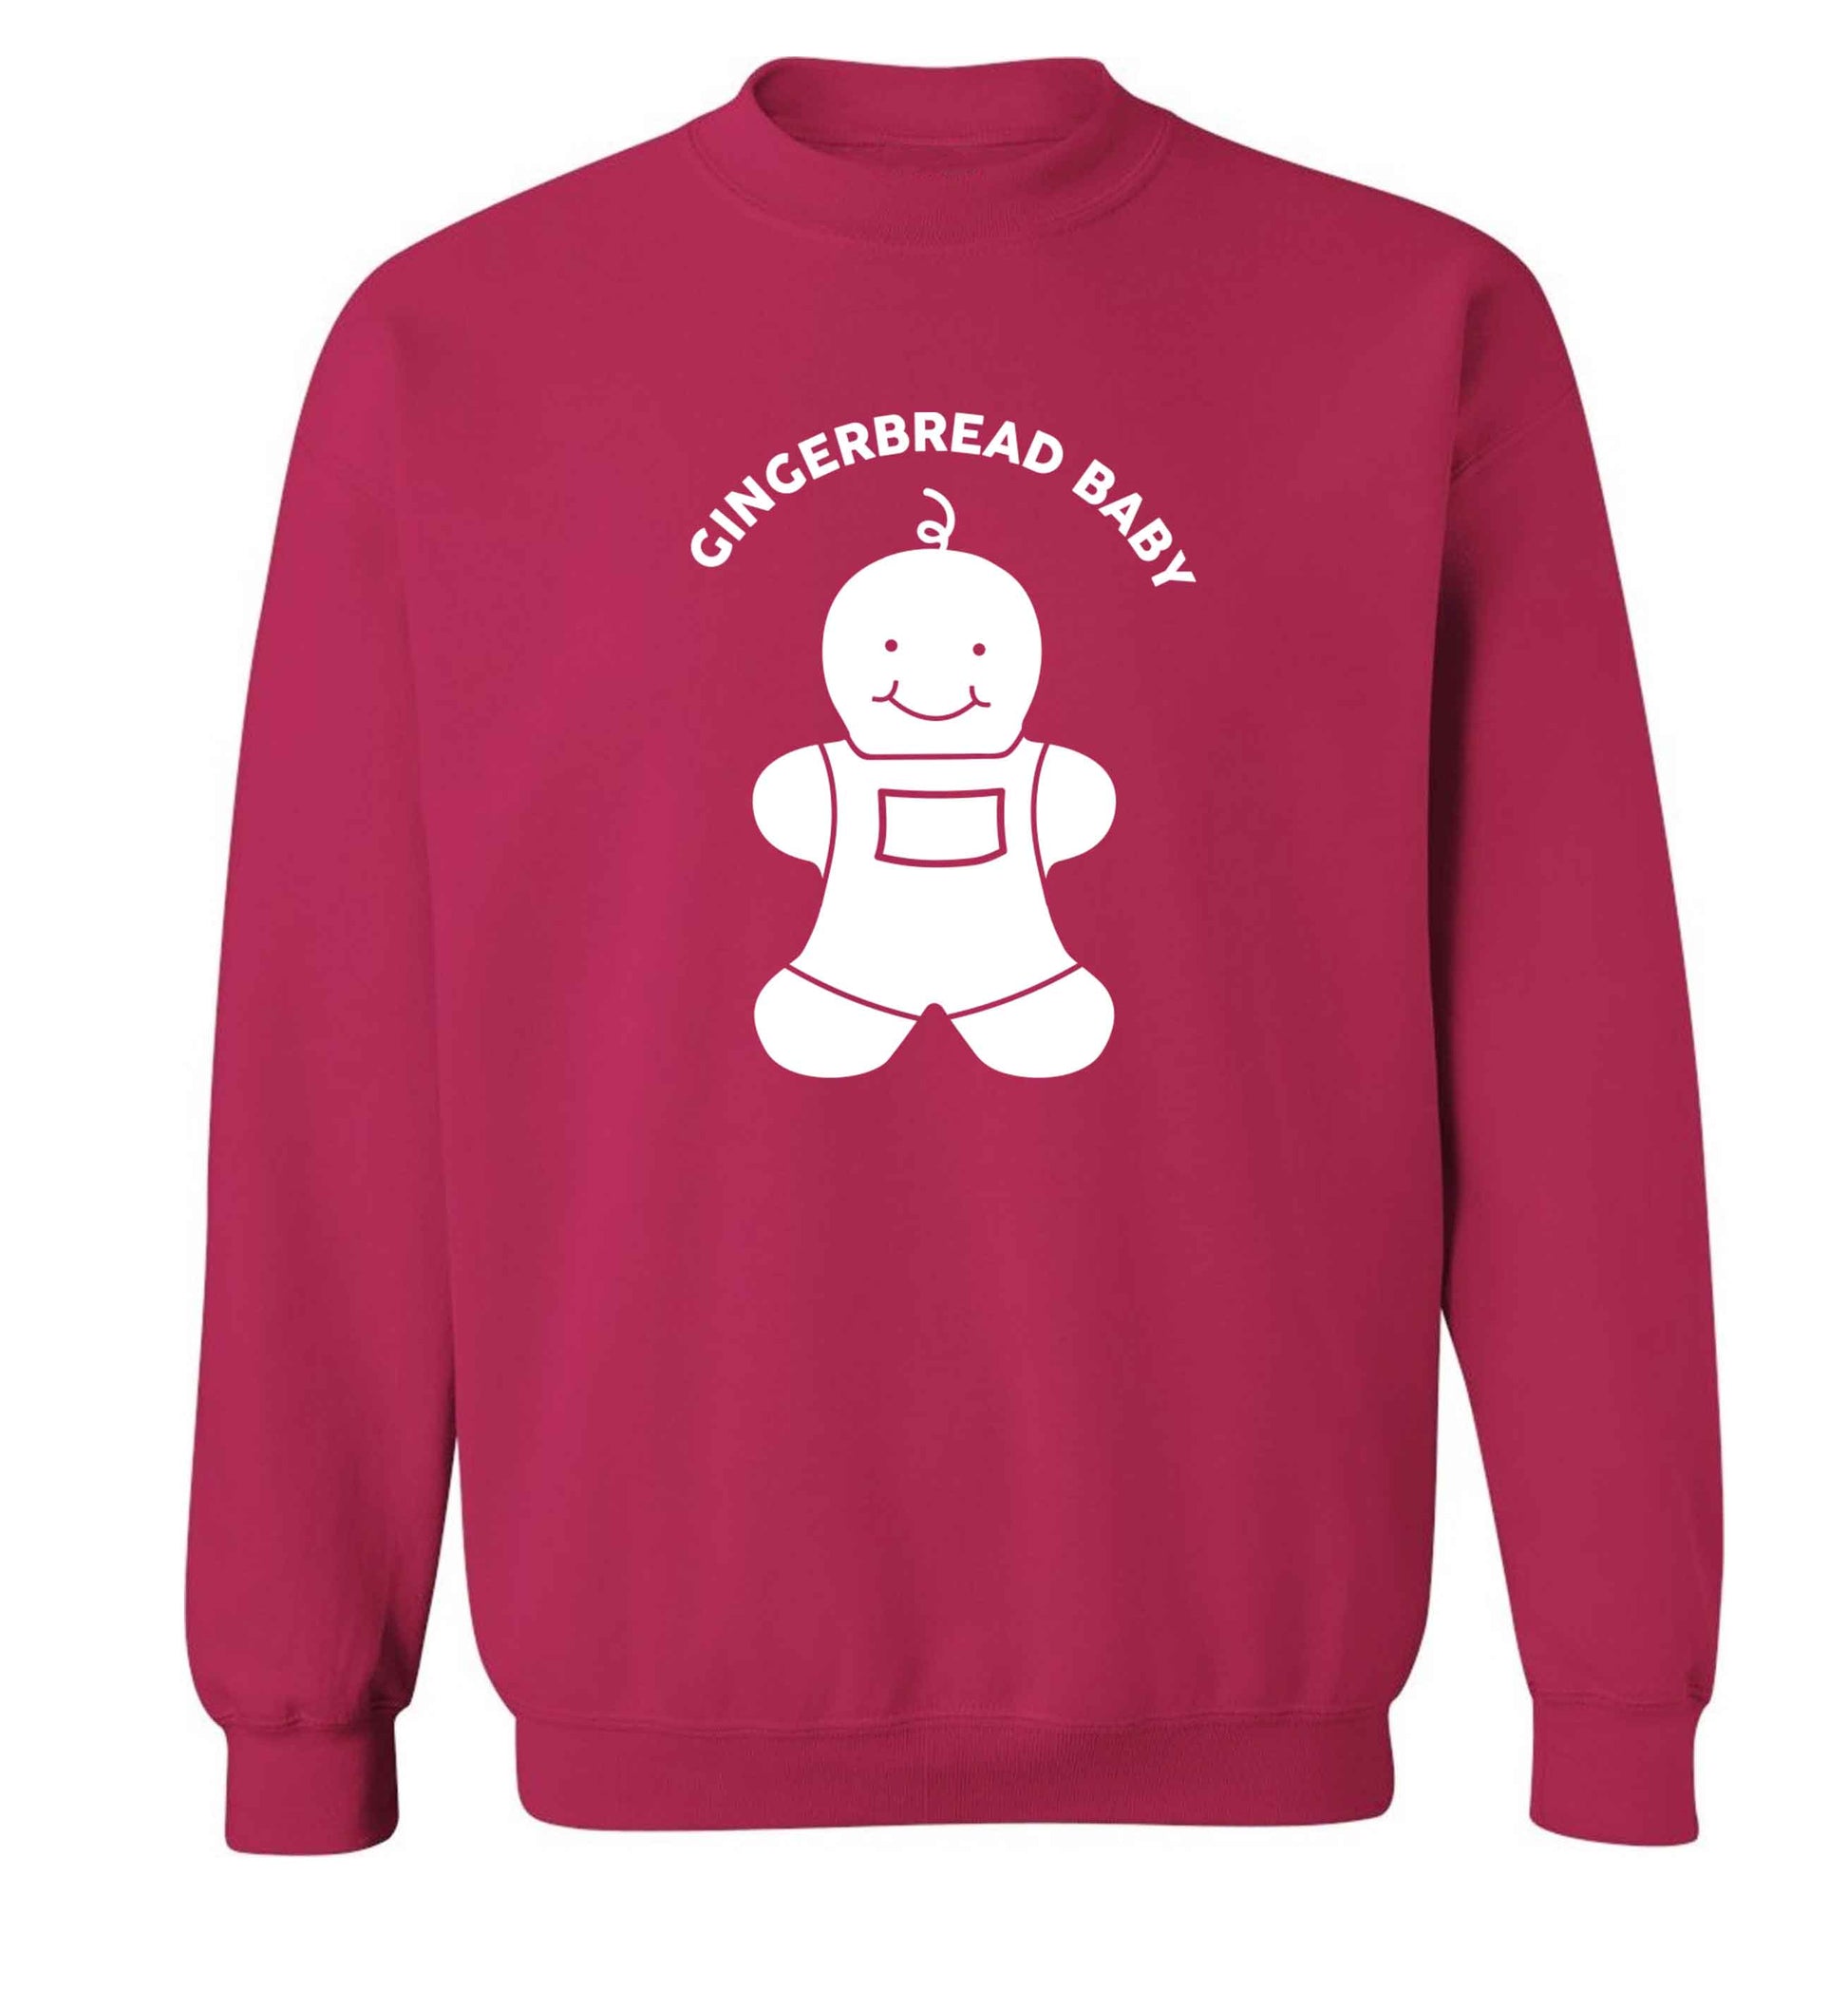 Gingerbread baby adult's unisex pink sweater 2XL